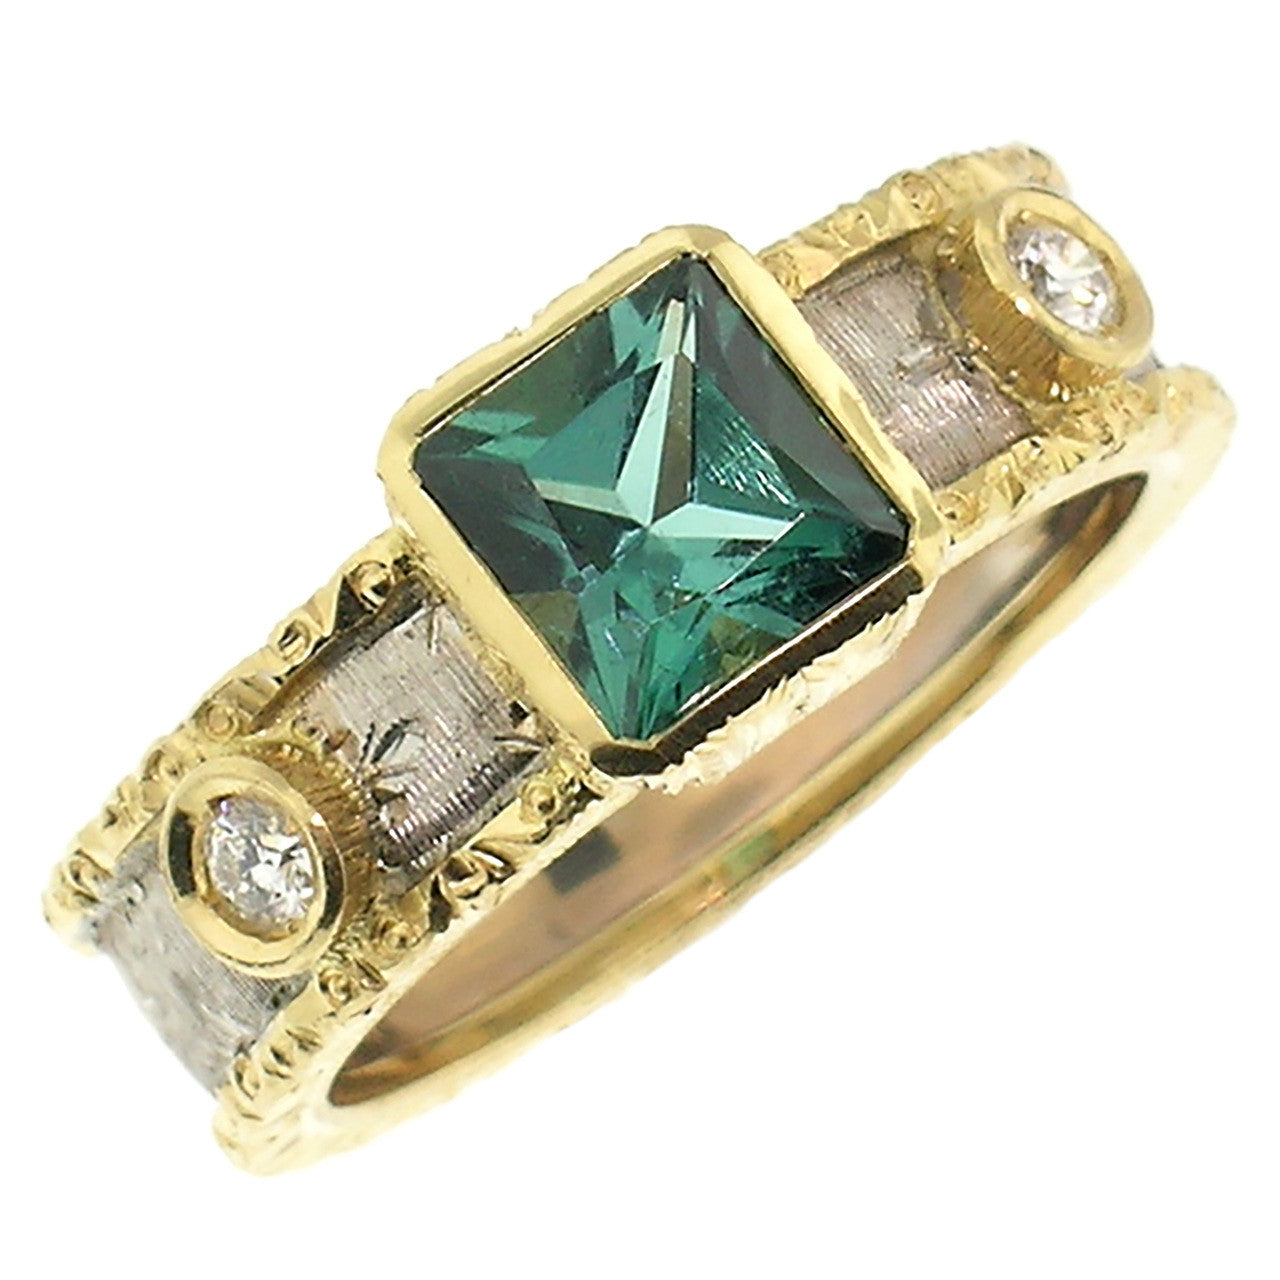 Blue Green Tourmaline 18kt Sienna Ring made in Florence Italy by Cynthia Scott Jewelry